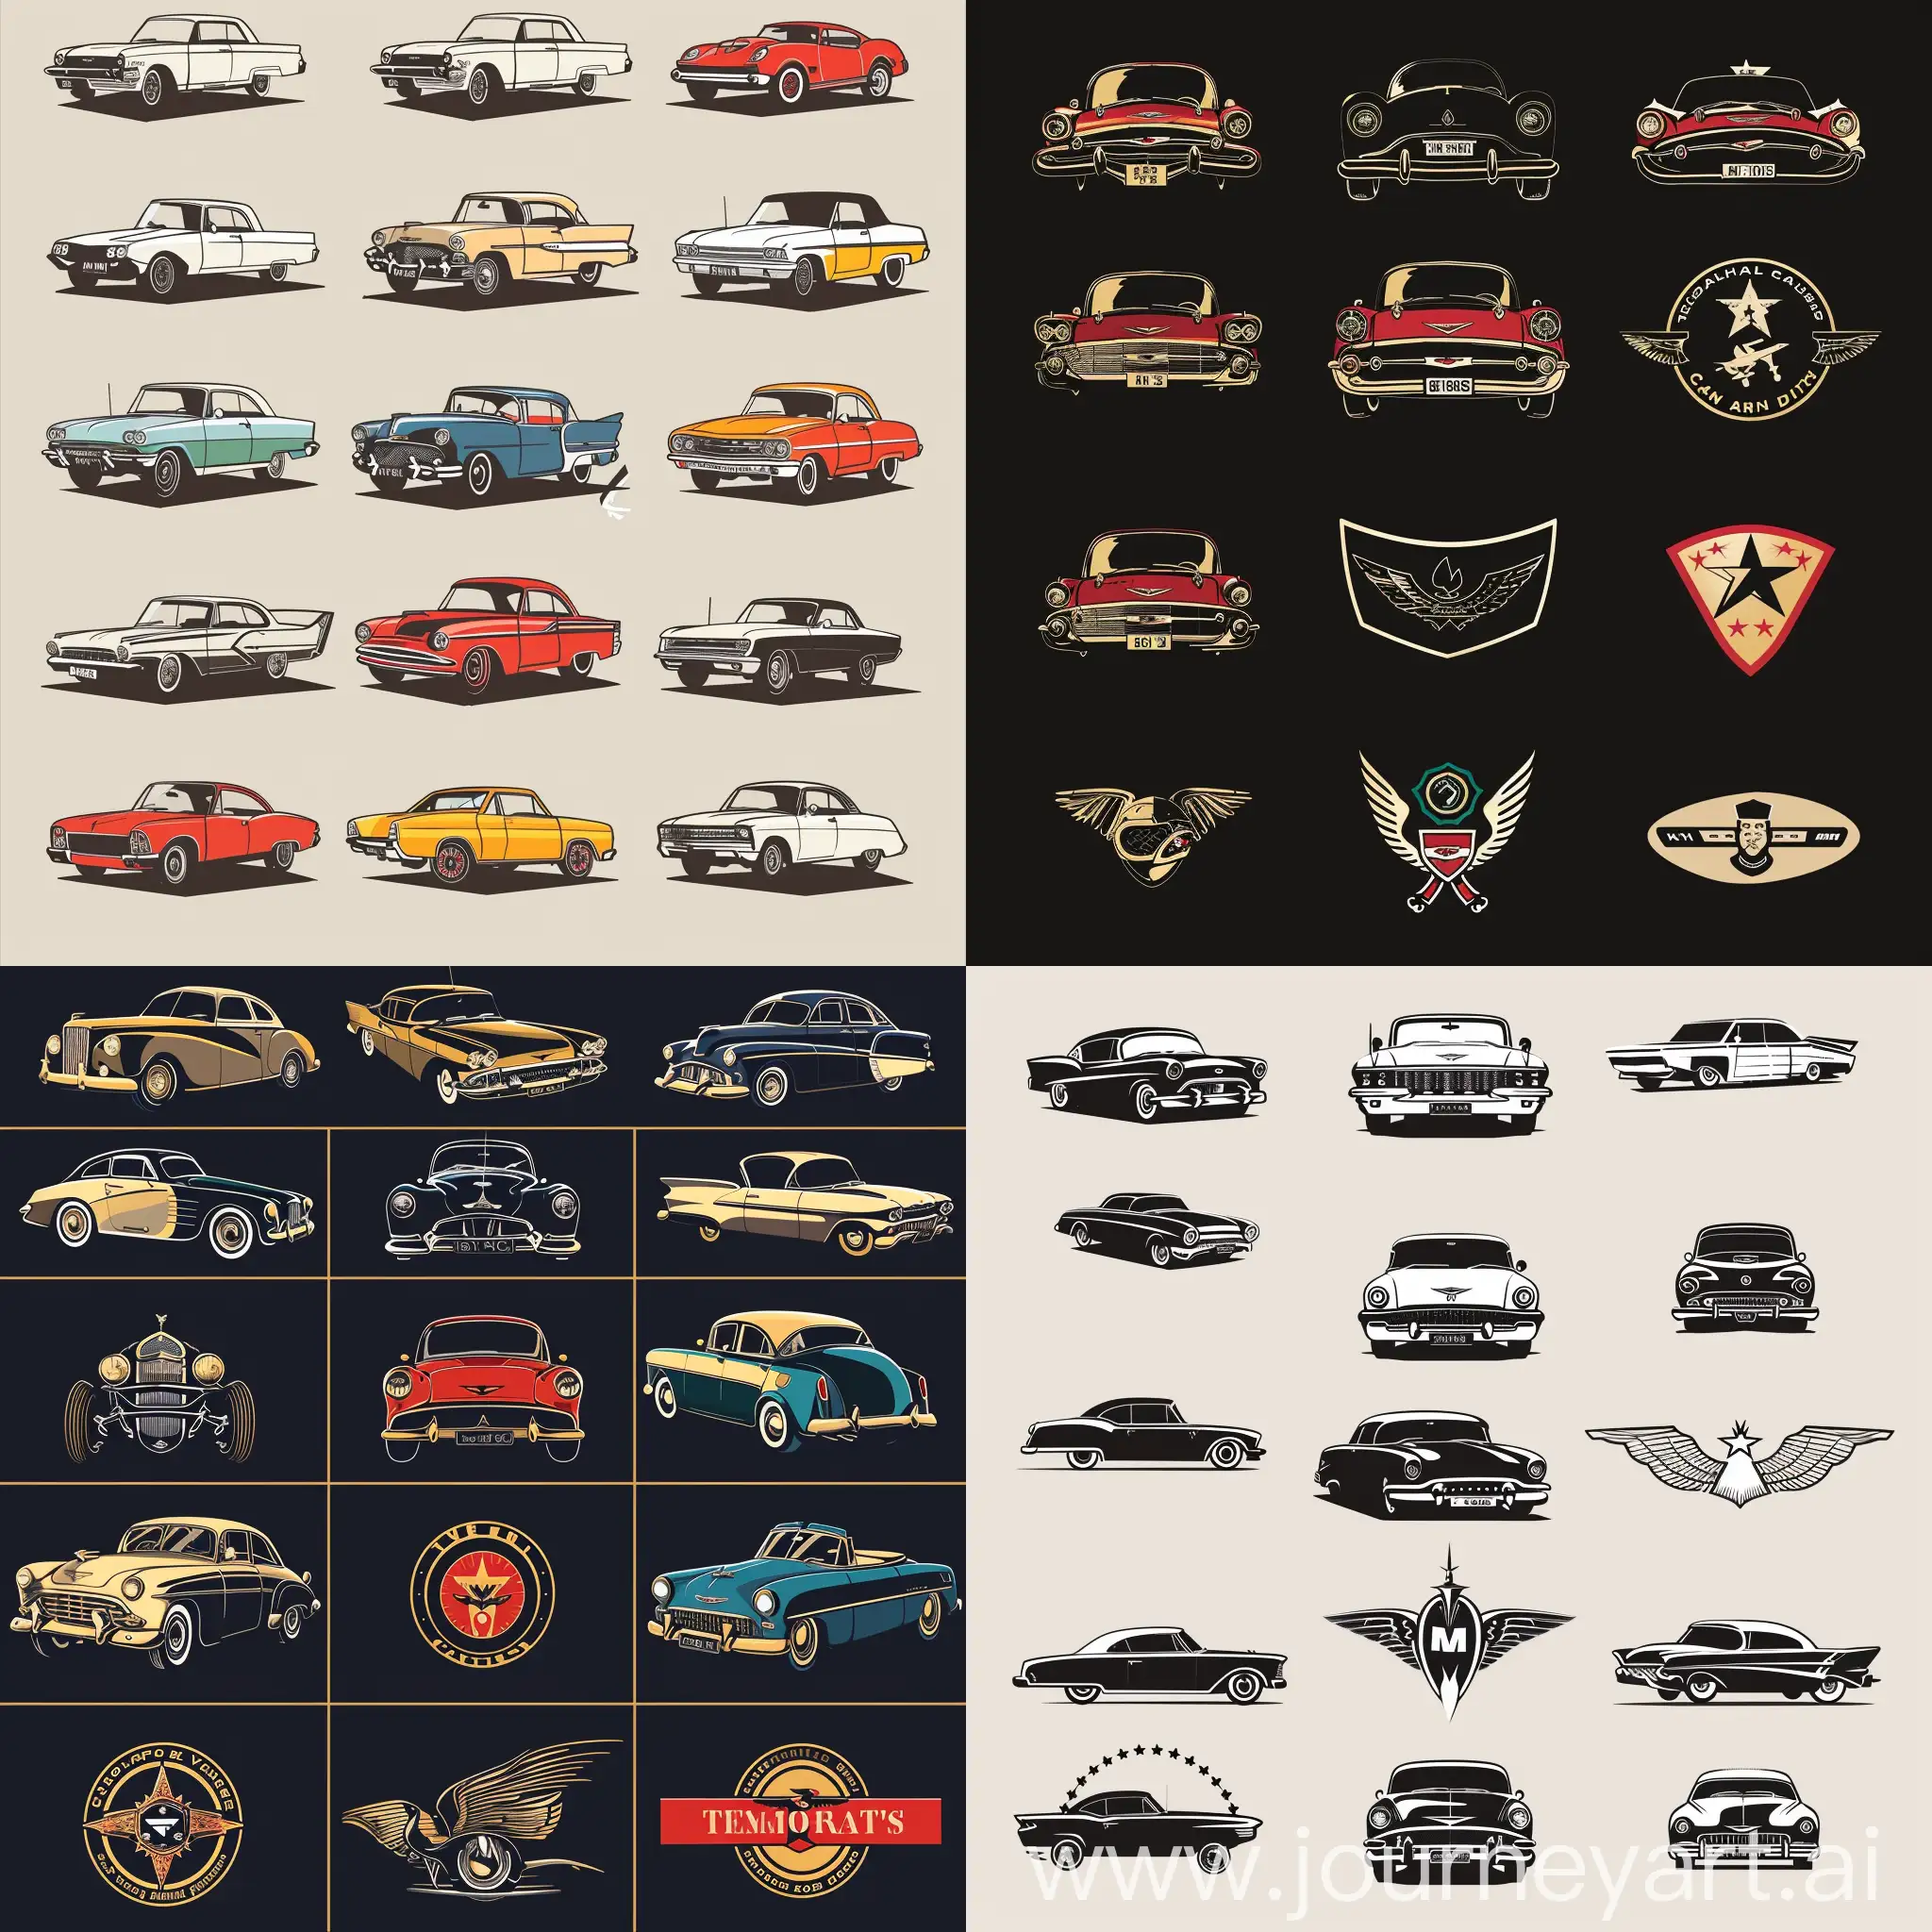 Vintage-Car-Fashion-Logos-Iconic-Designs-Inspired-by-Hong-Kongs-Classic-Automobile-Culture